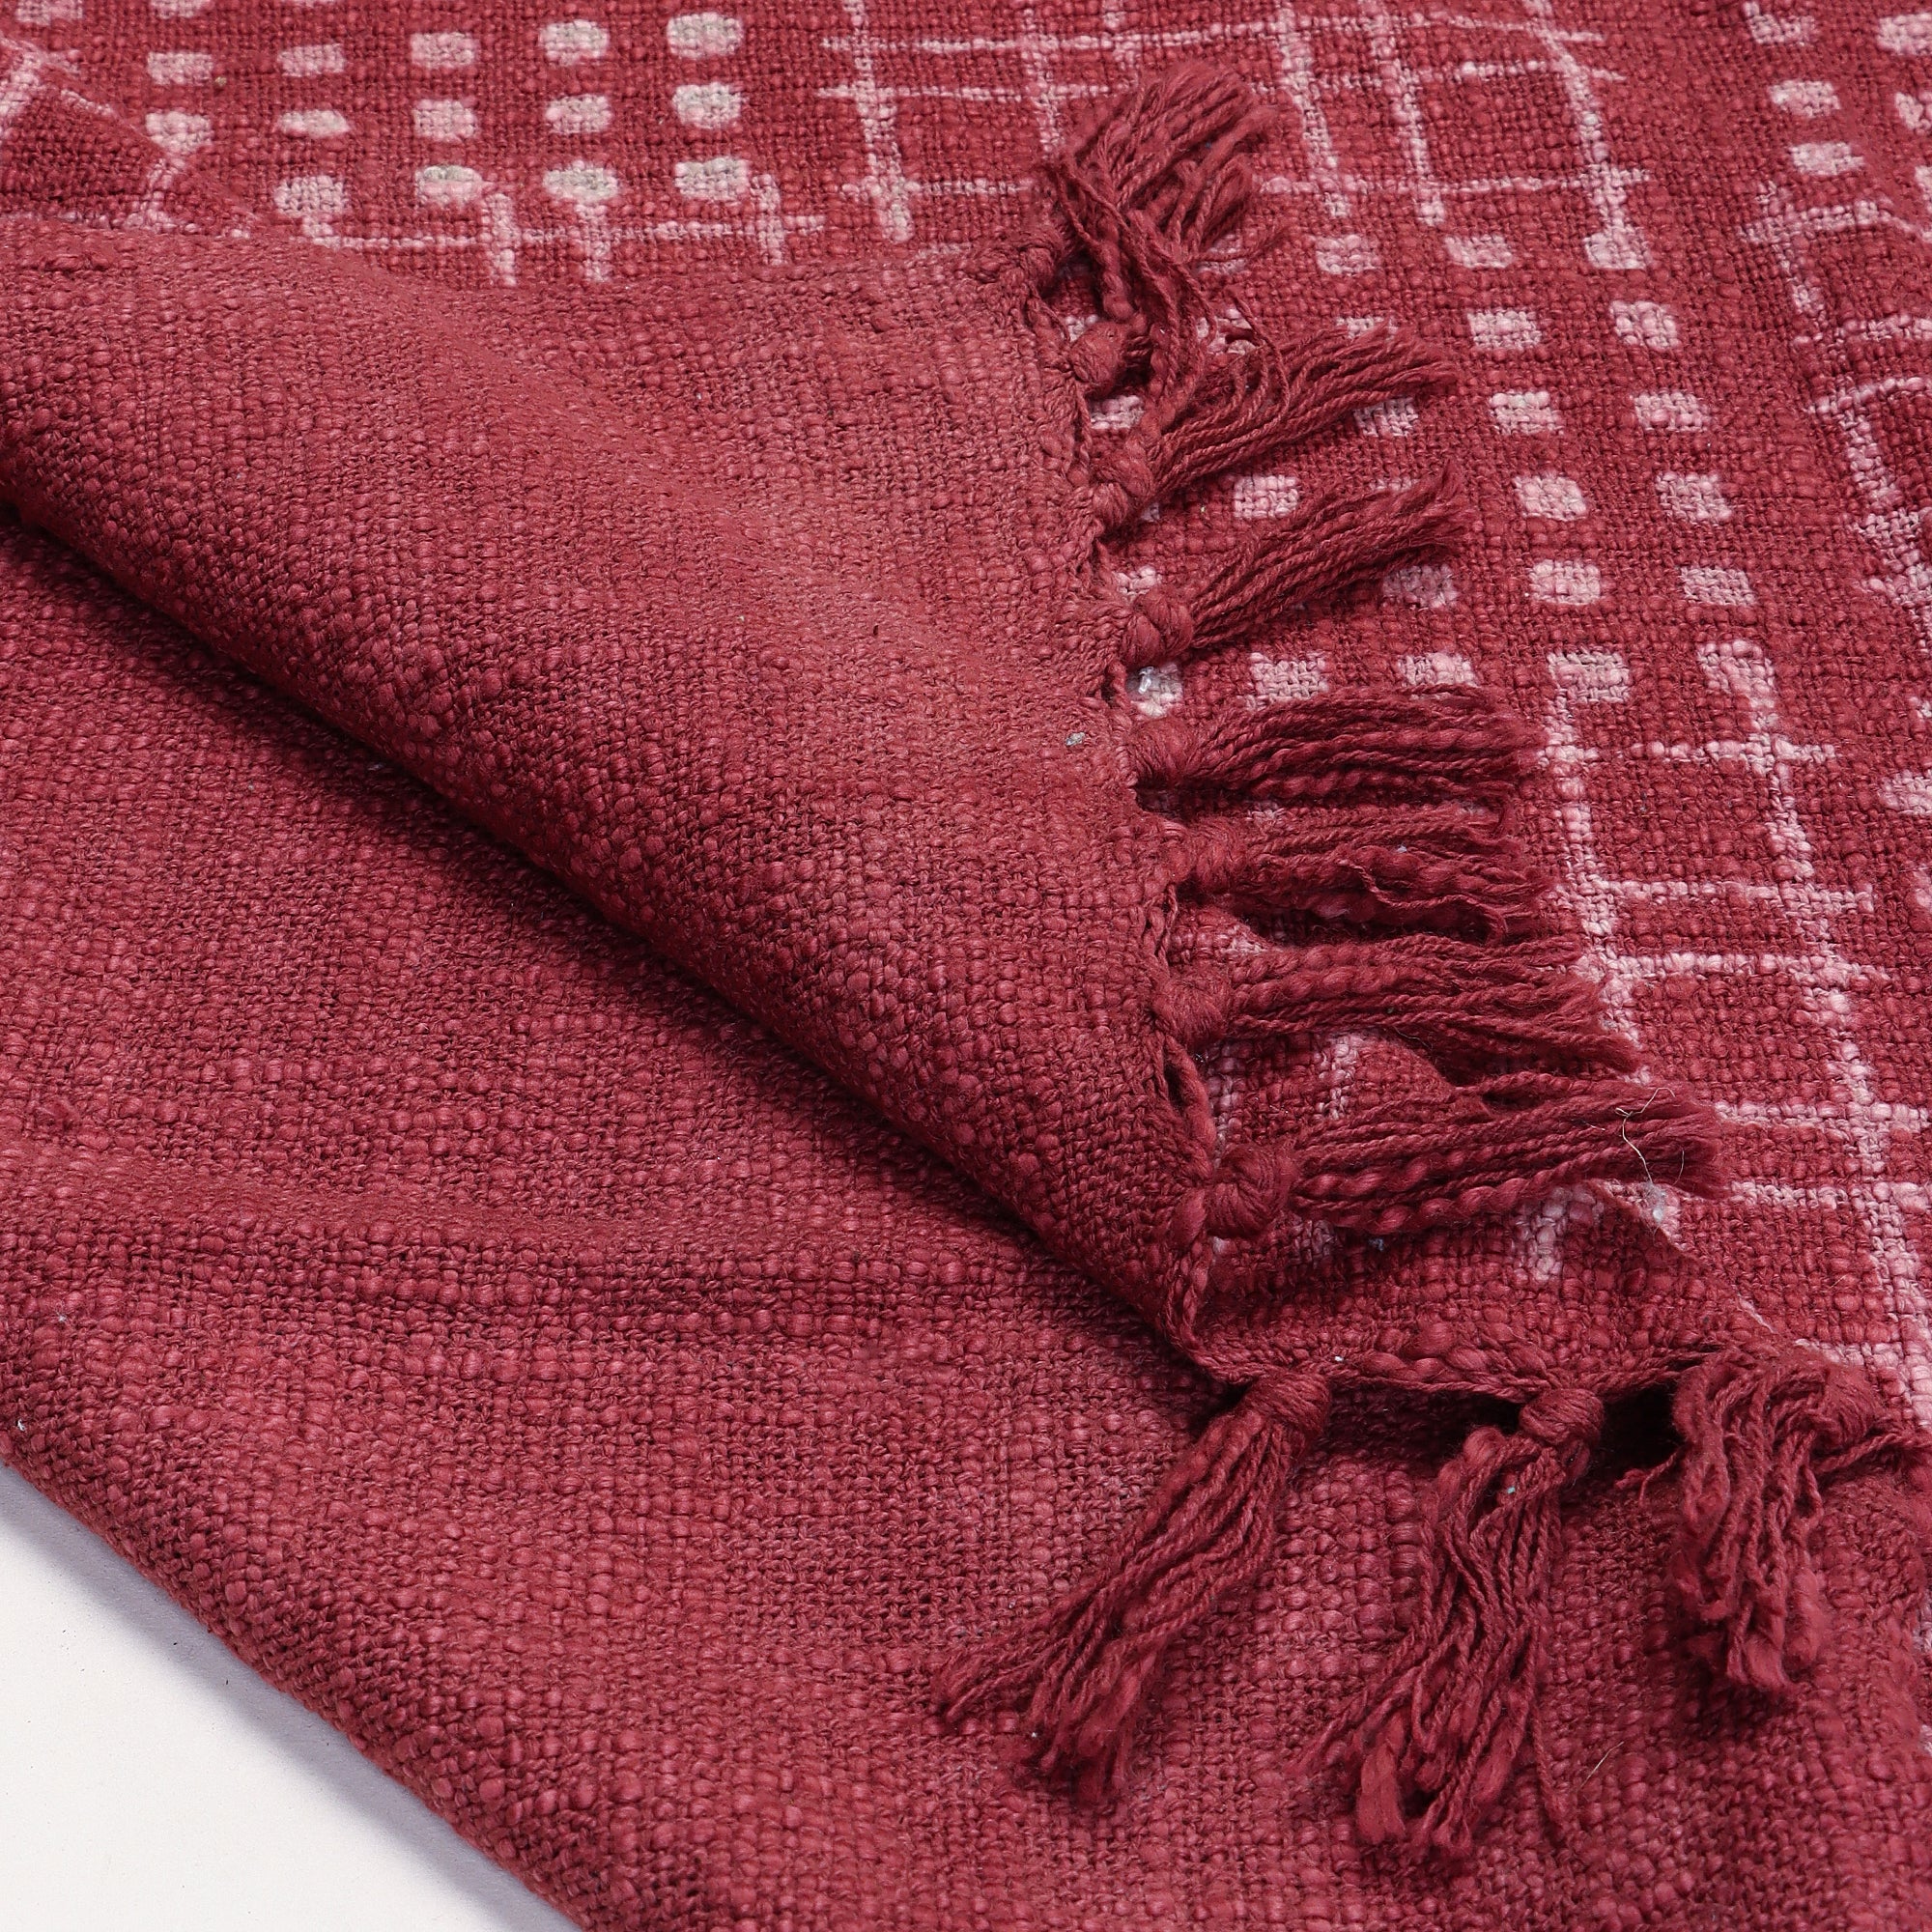 Maroon Color Soft Cotton Sofa Tufted Throw for Home Decor